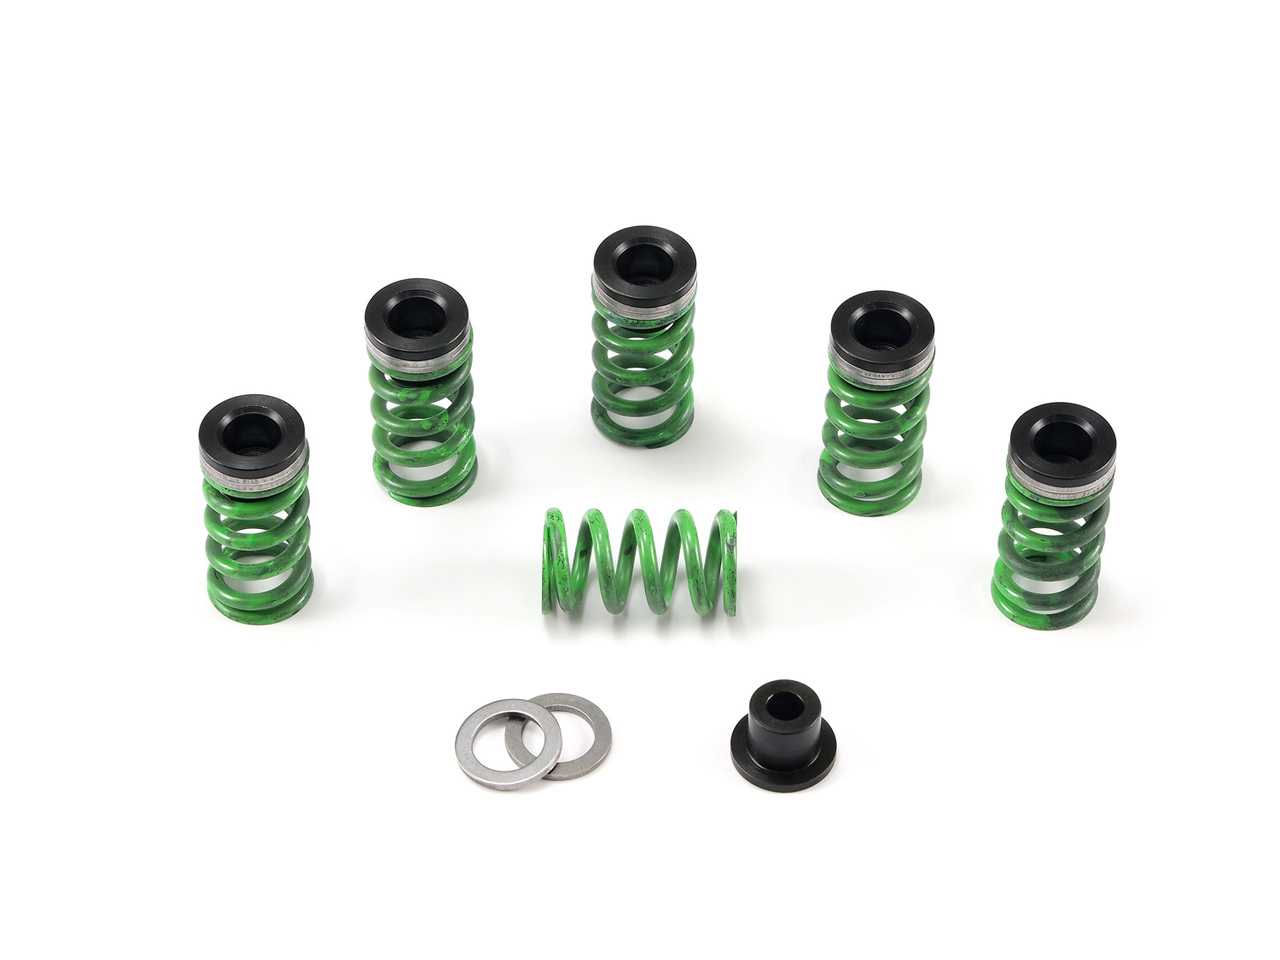 Buy Extra Heavy Duty Clutch Spring Kit Ninja H2 (2015) - Clutch Conversion Kit REQUIRED for use in Ninja H2 (16-21), H2 SX (18-21), and Z H2 (20-23) SKU: 270721 at the price of US$ 99 | BrocksPerformance.com